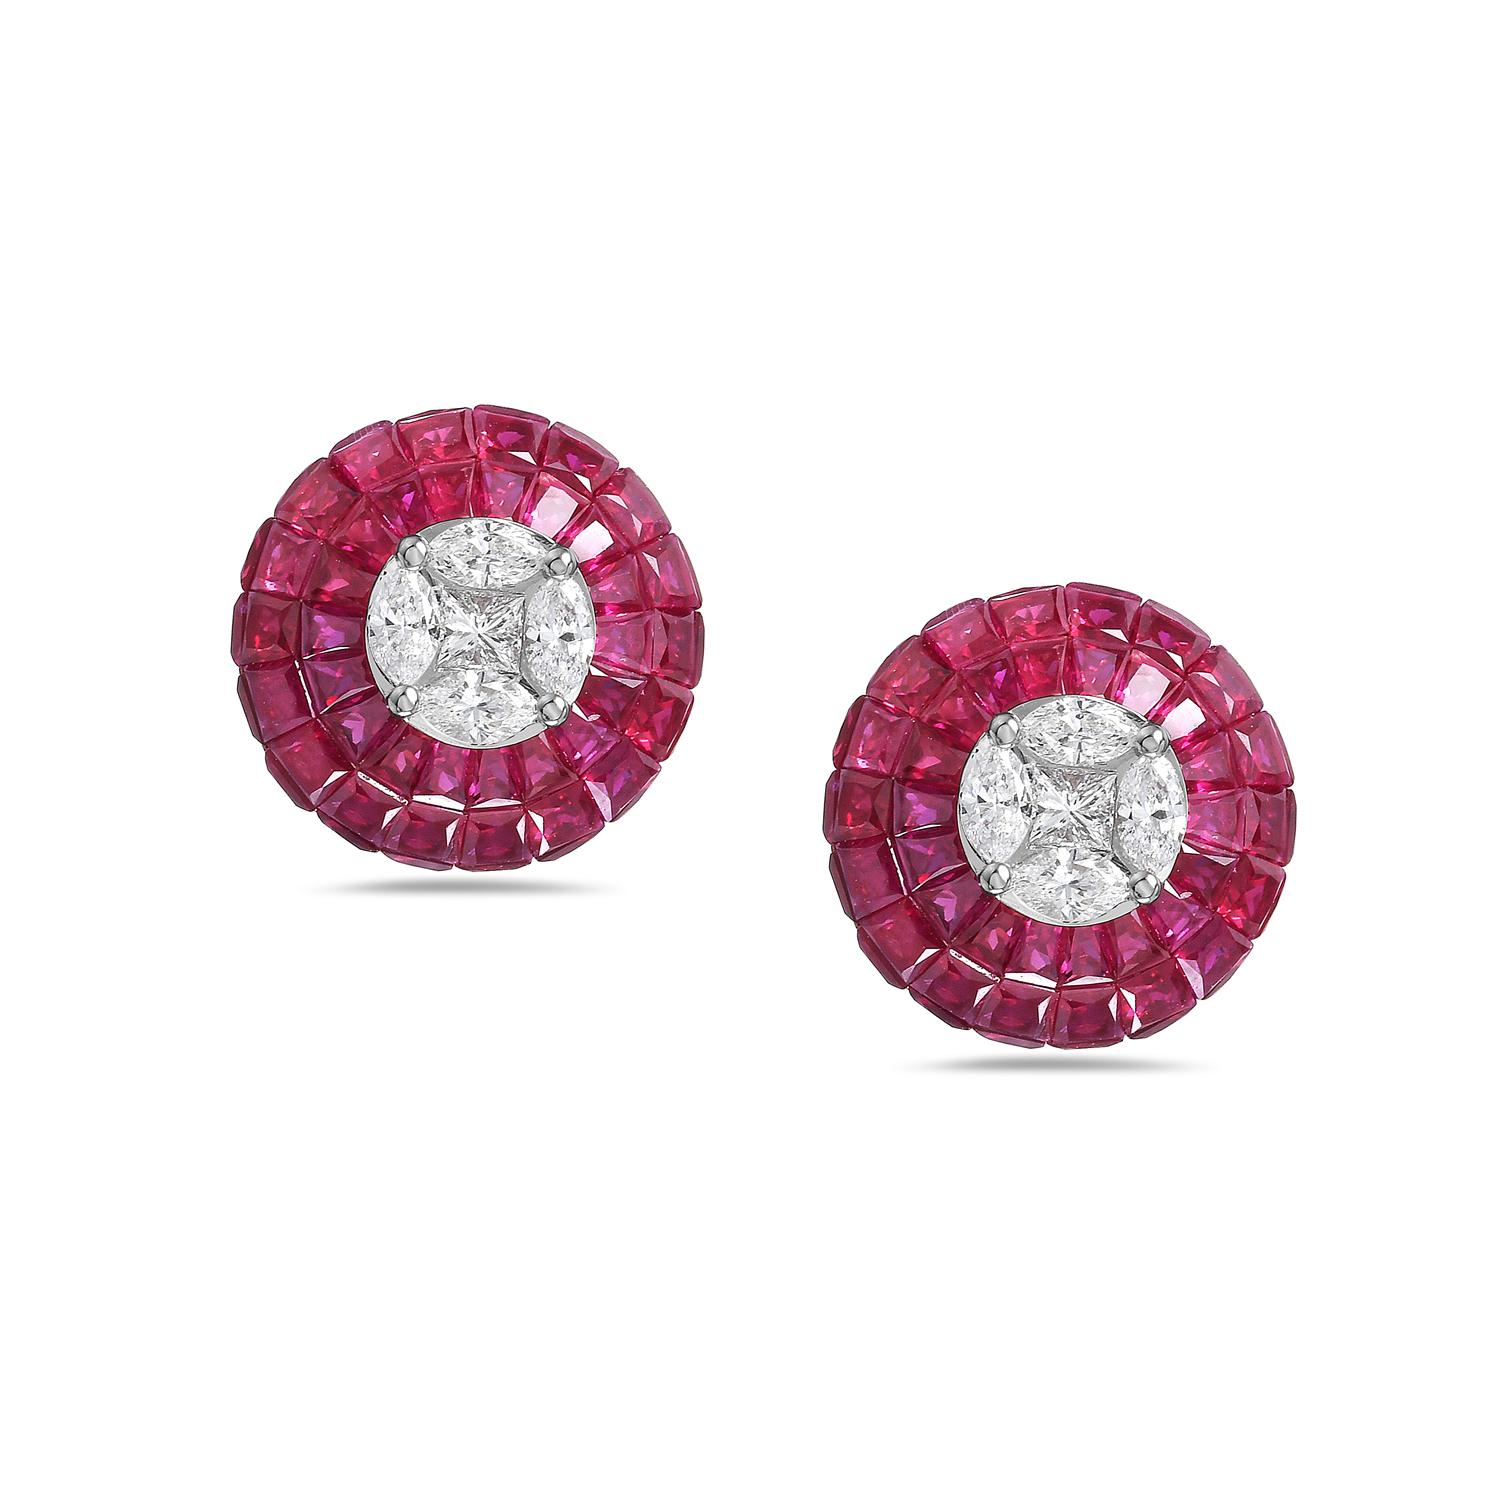 Mixed Cut 8.45 Ct Ruby Studs With Diamonds Made In 18k Gold For Sale